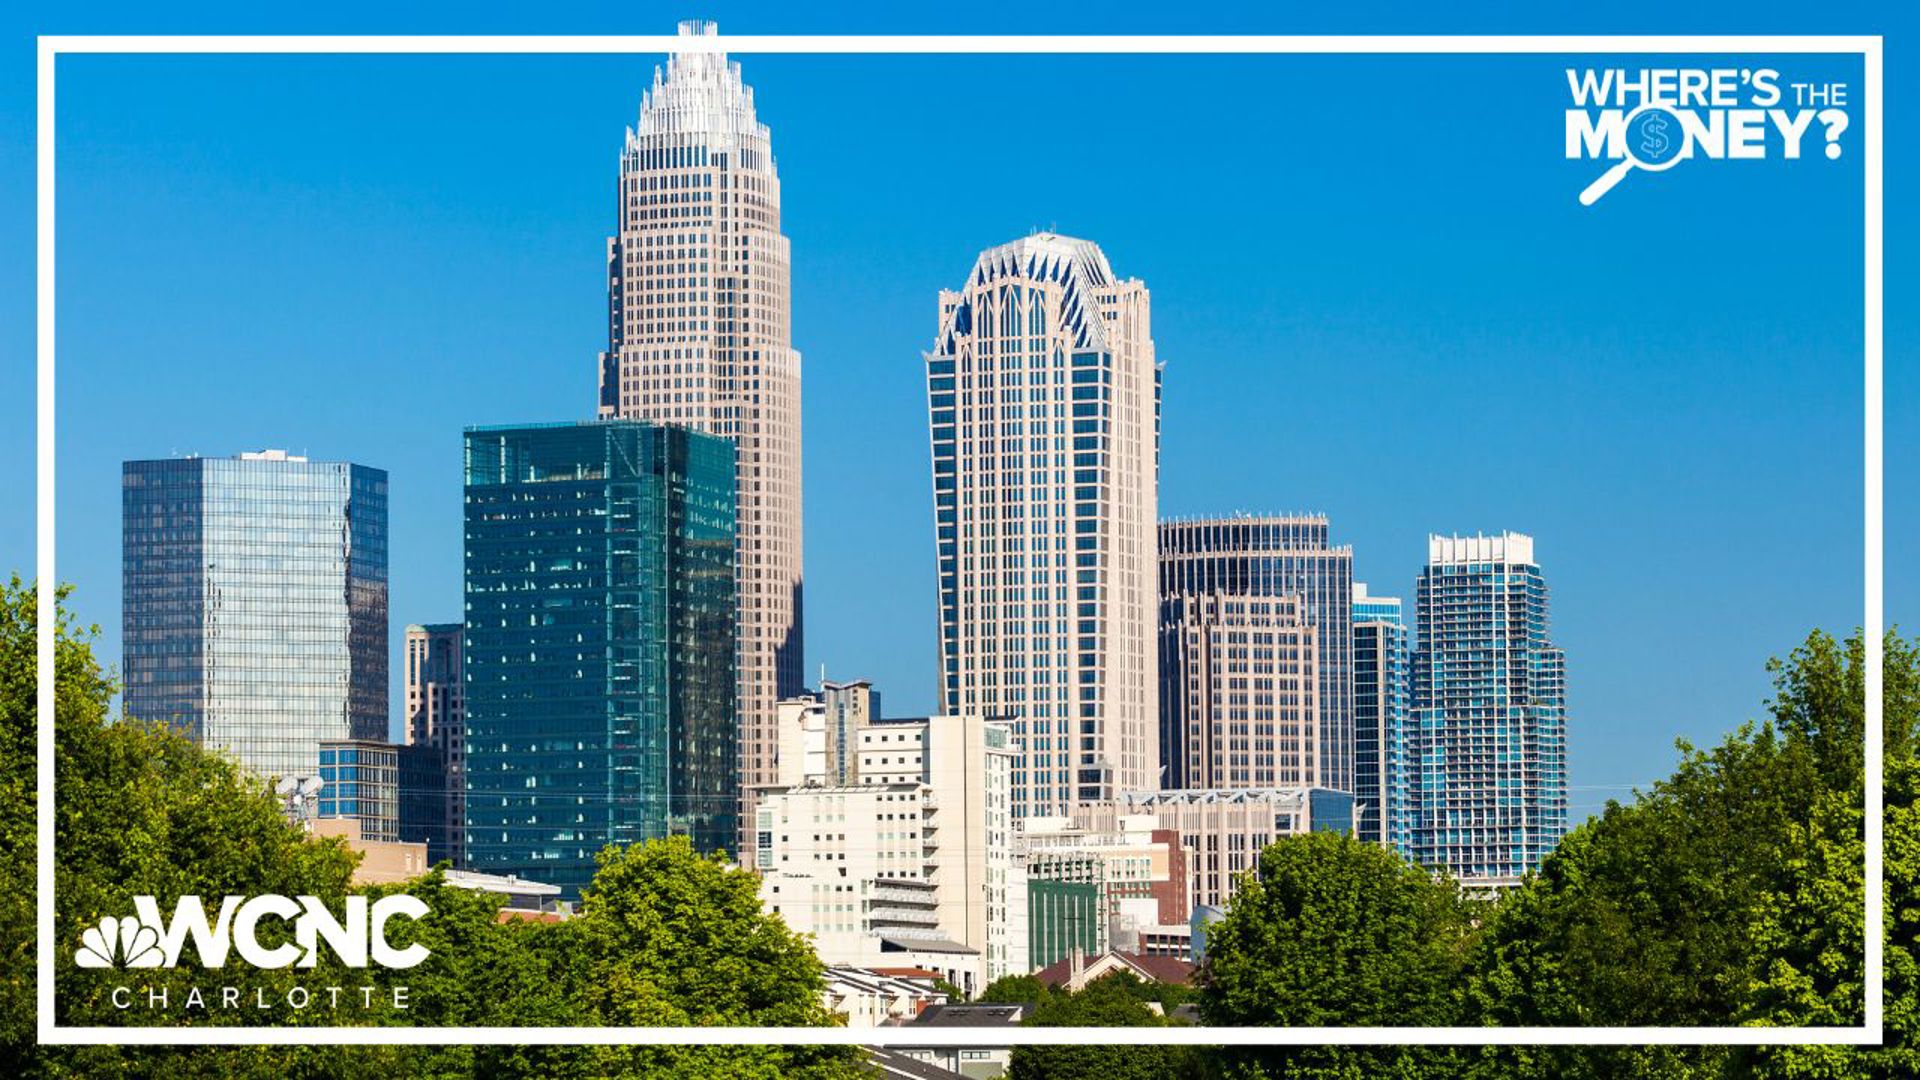 A new study shows Charlotte is an ideal place to live for new graduates,.